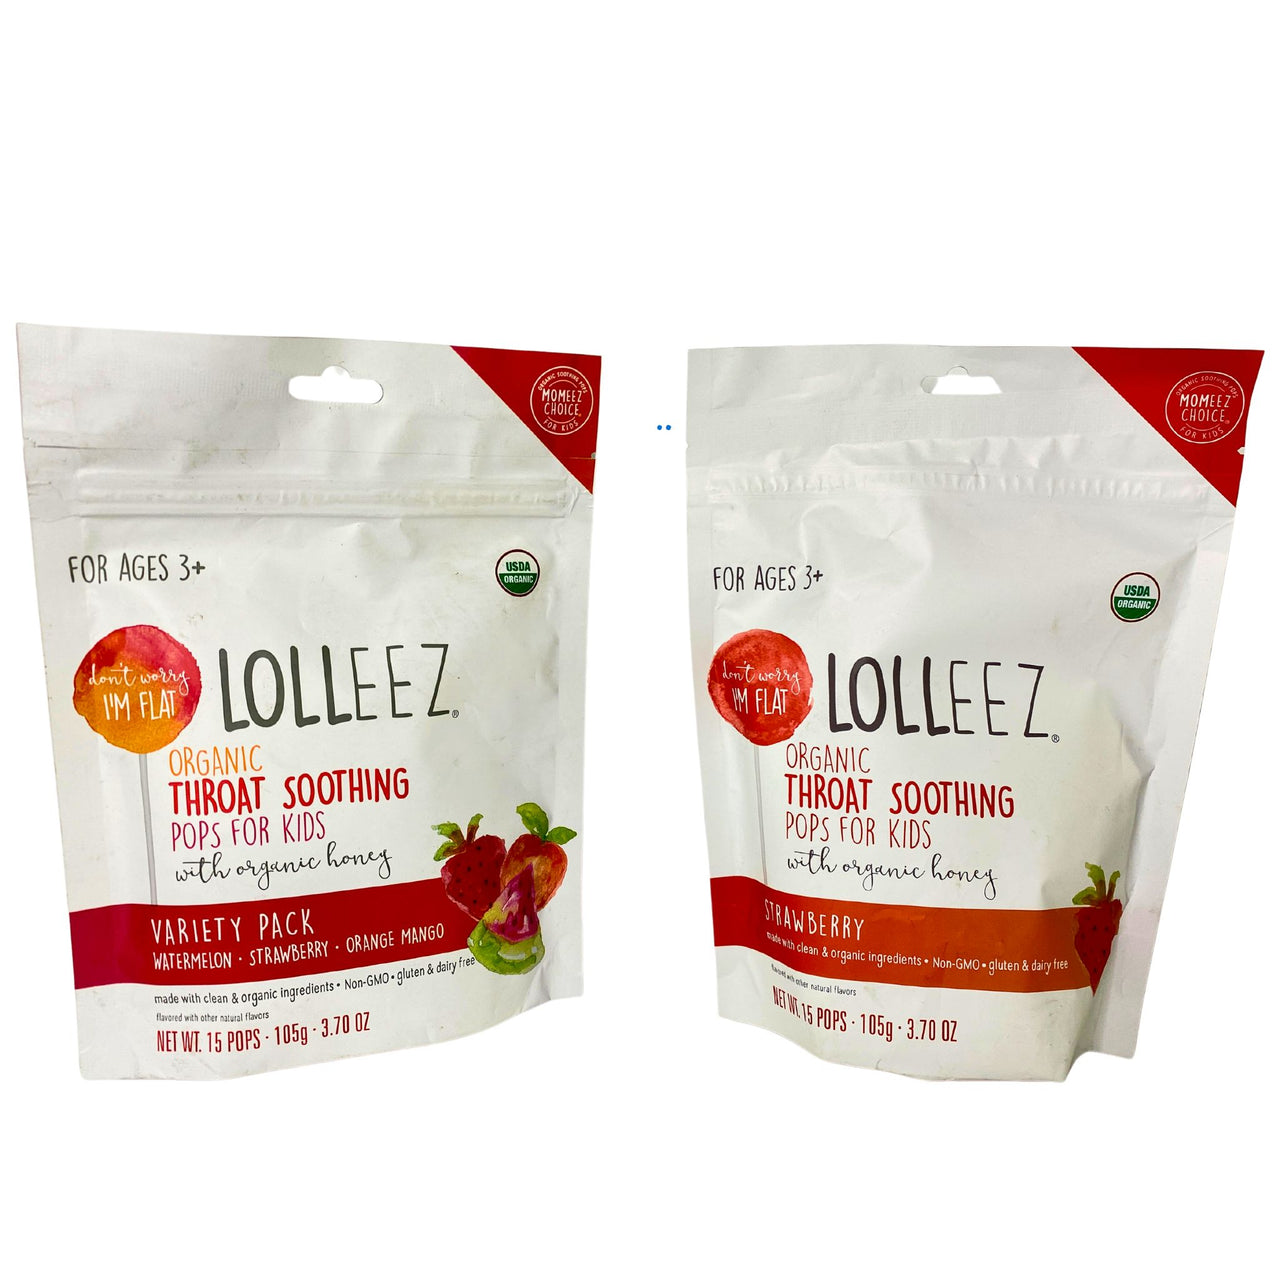 LOLLEEZ Organic Throat Soothing Flat Pops for Kids